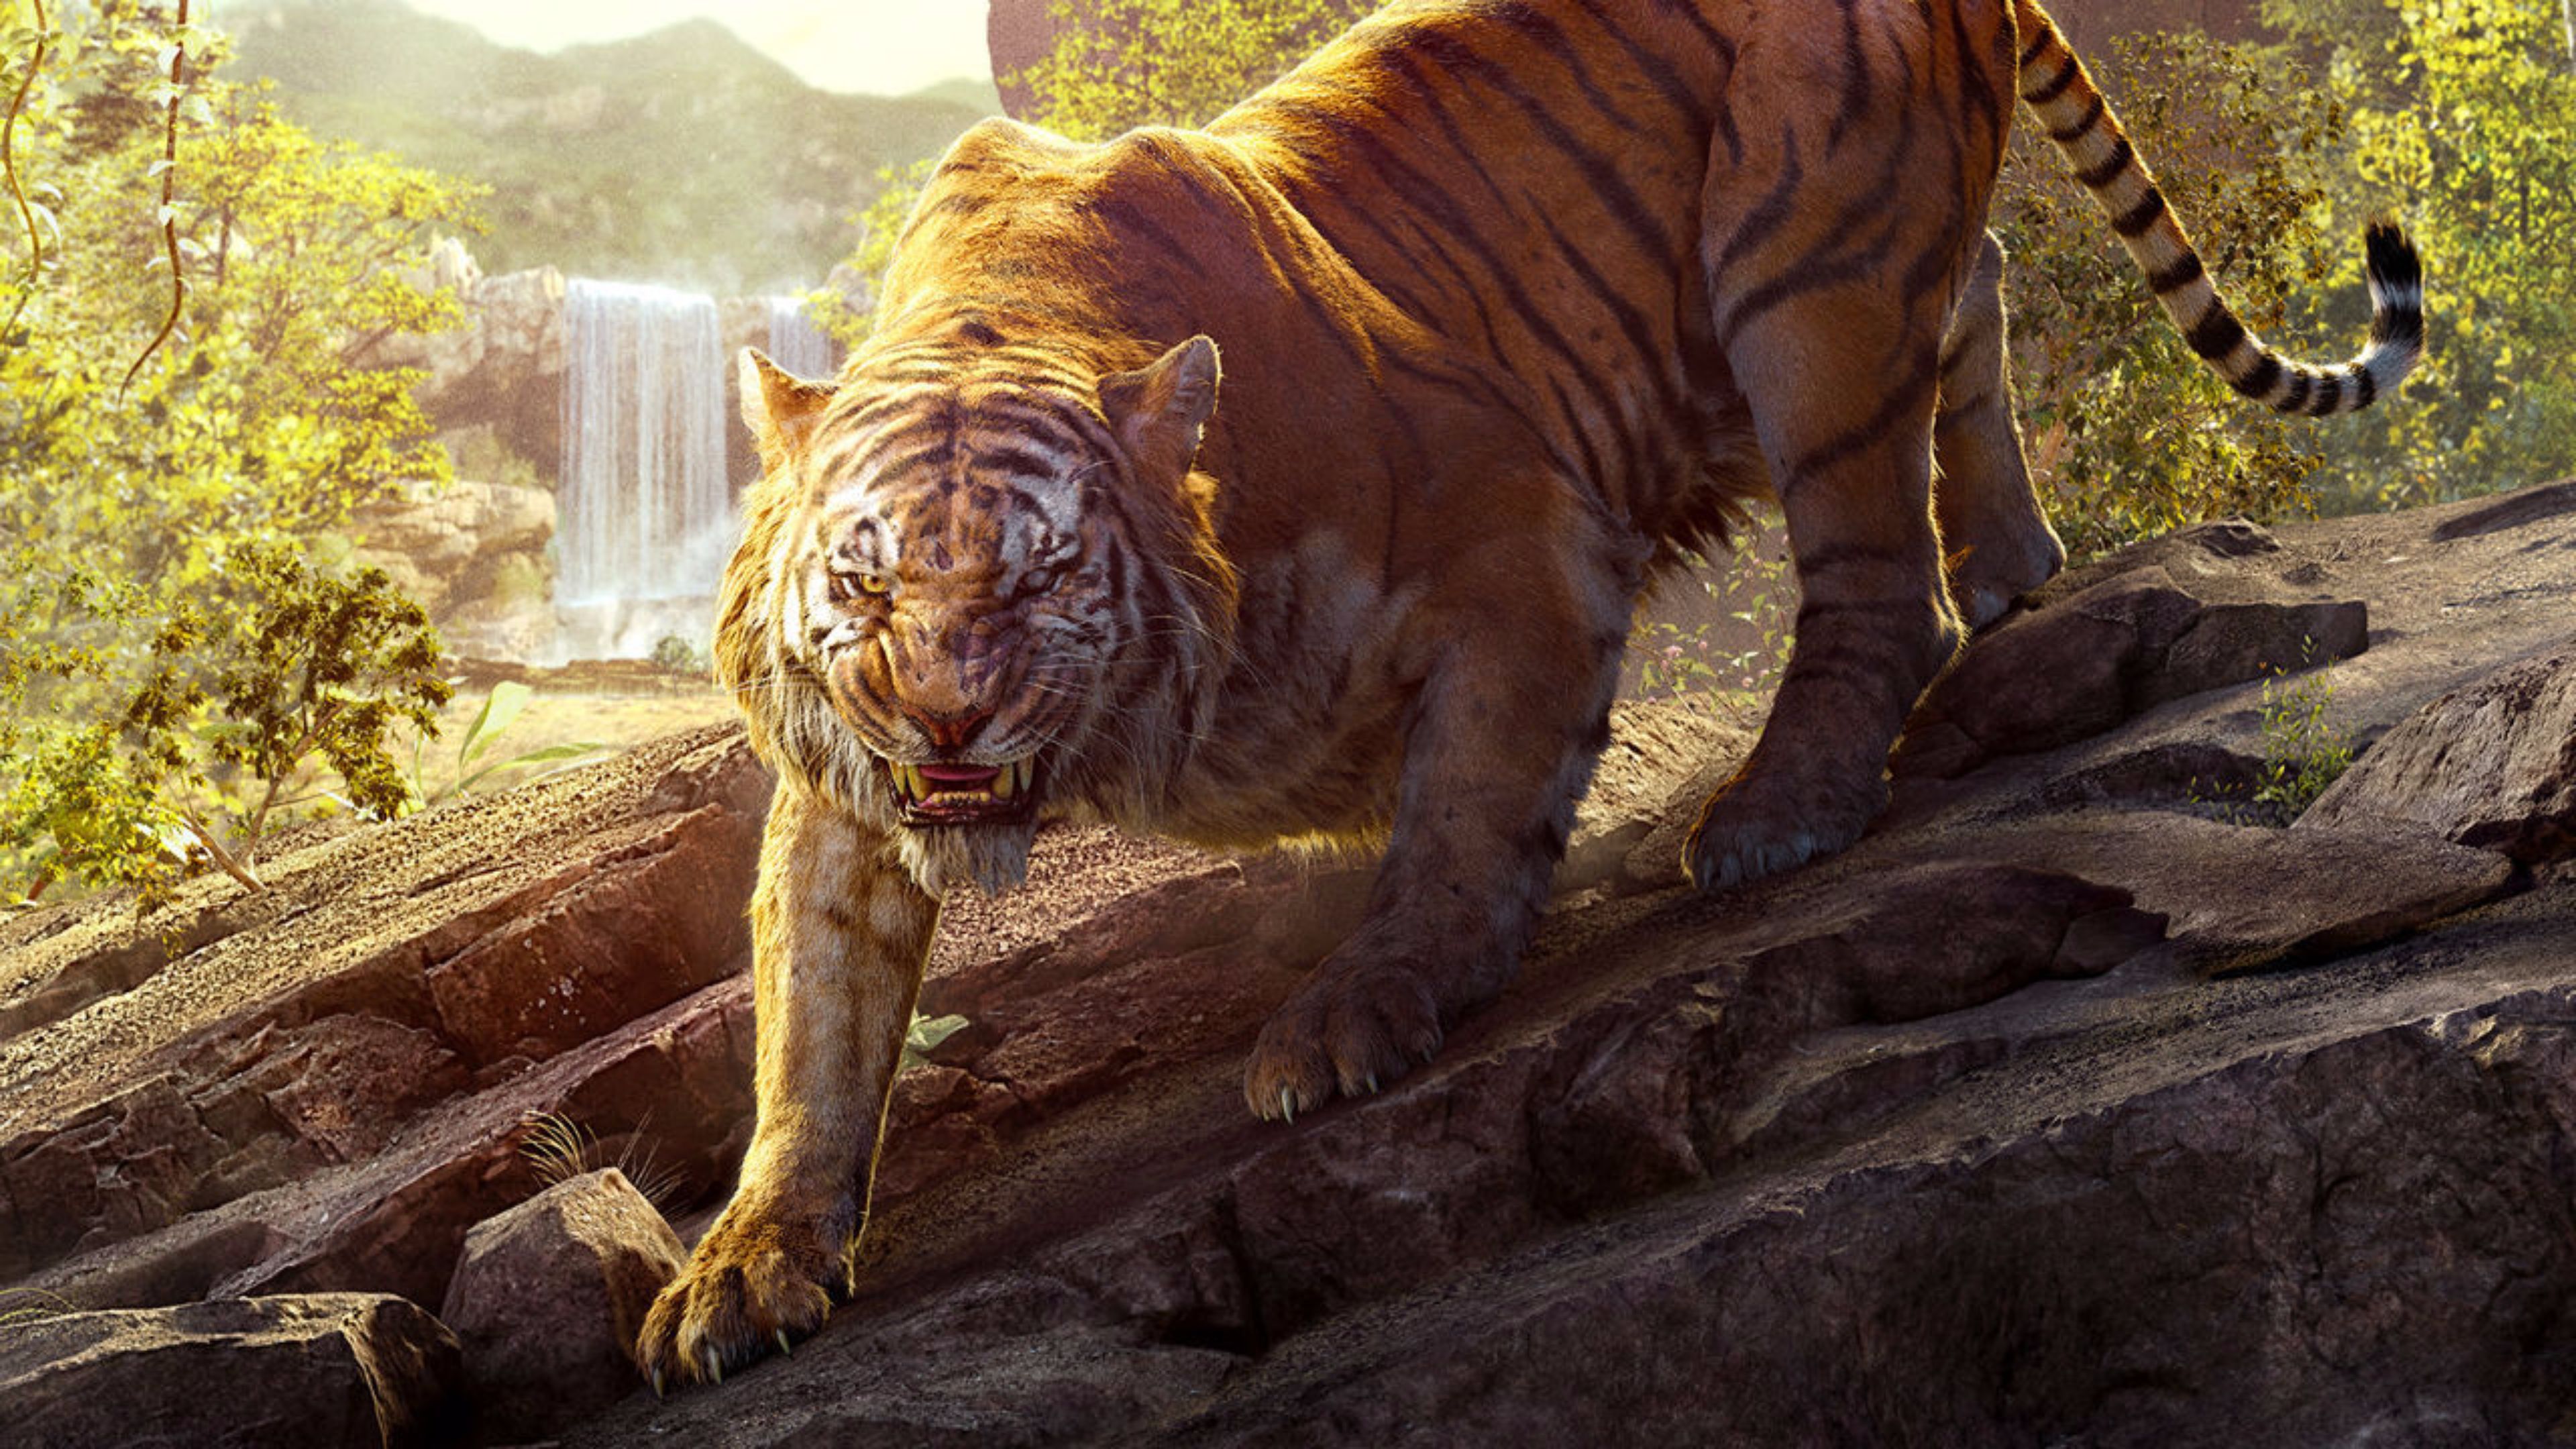 The Jungle Book Movie Wallpapers